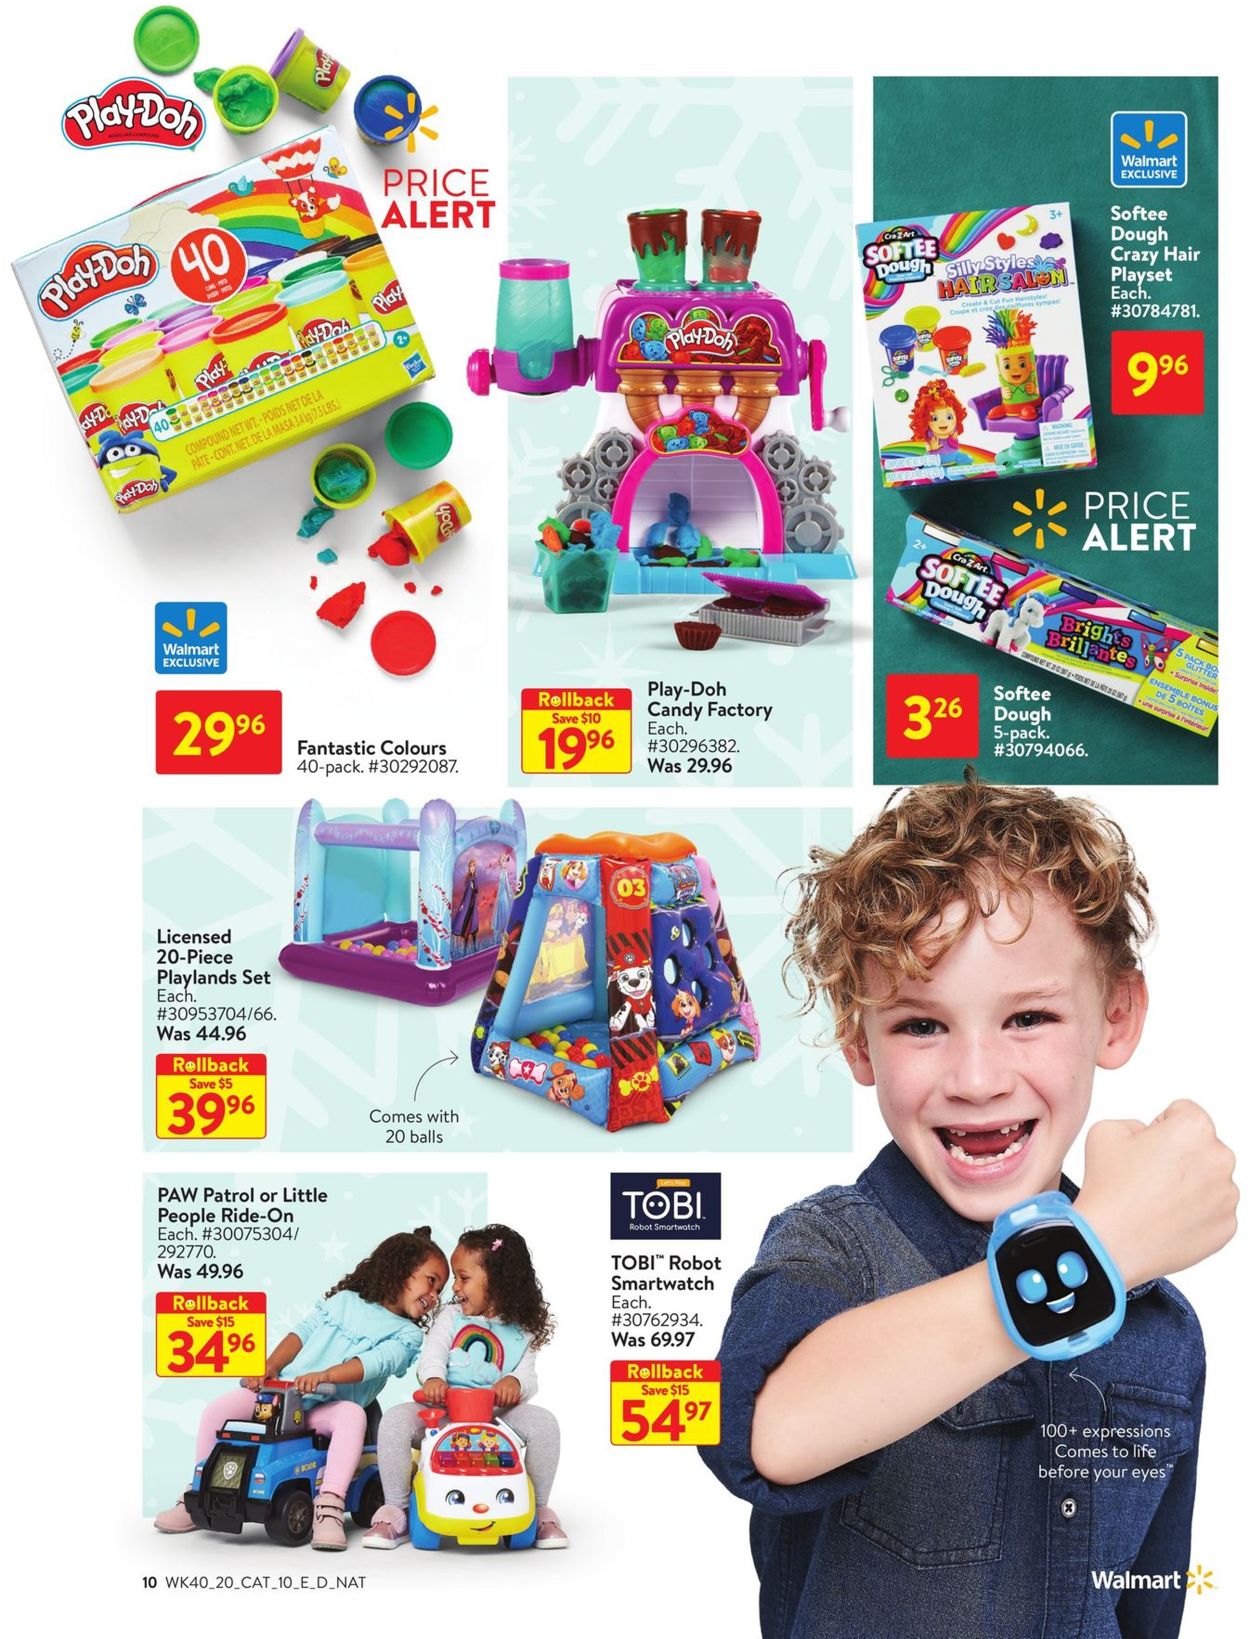 Walmart - Holidays 2020 Gift Guide Flyer - 10/29-12/24/2020 (Page 10)